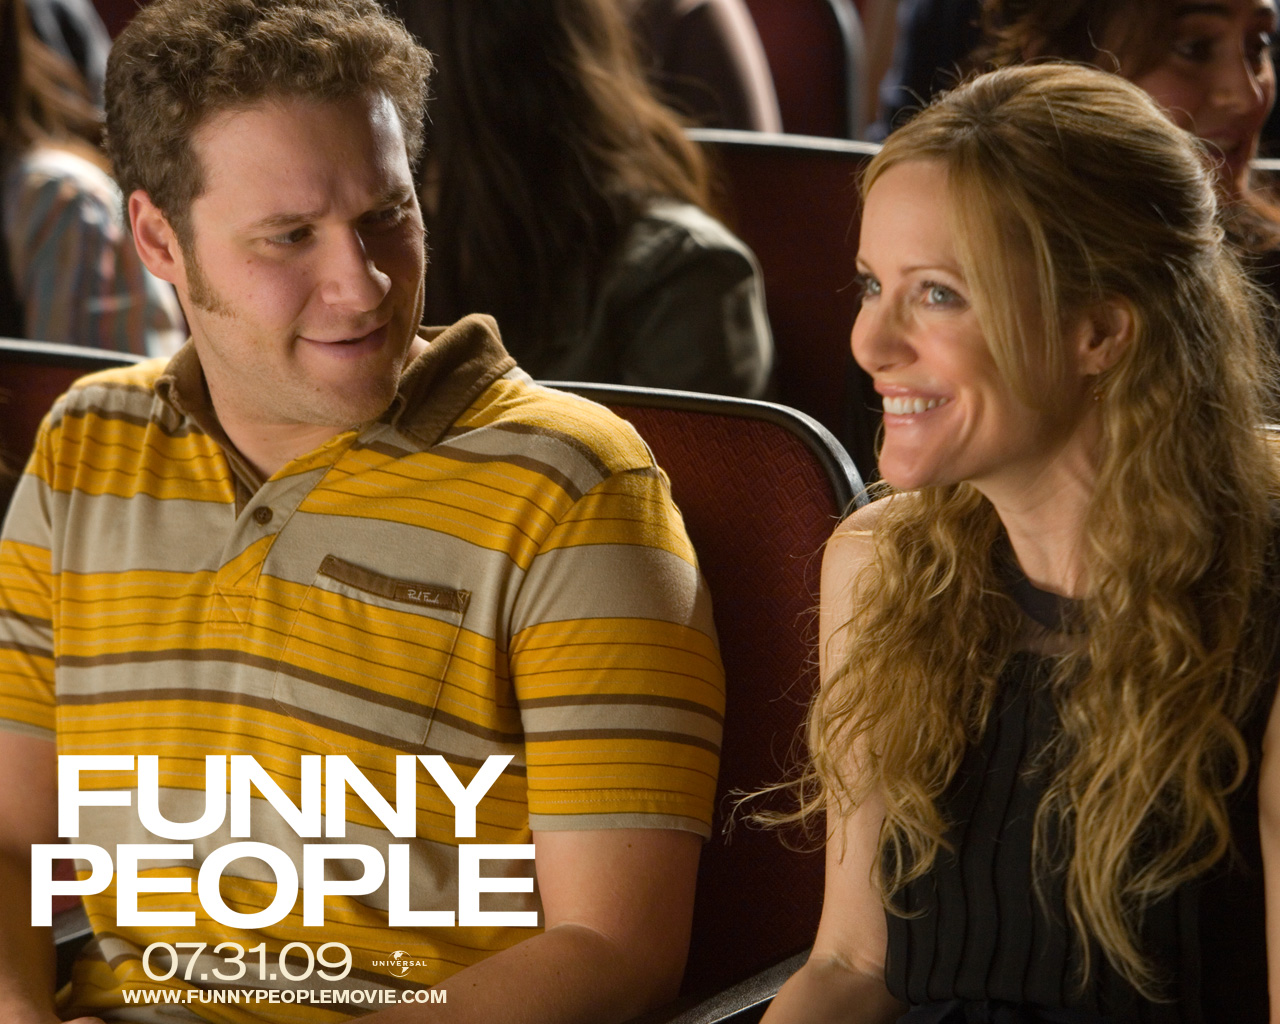 Funny People Movie Wallpaper On Coolwallpaper Org Site